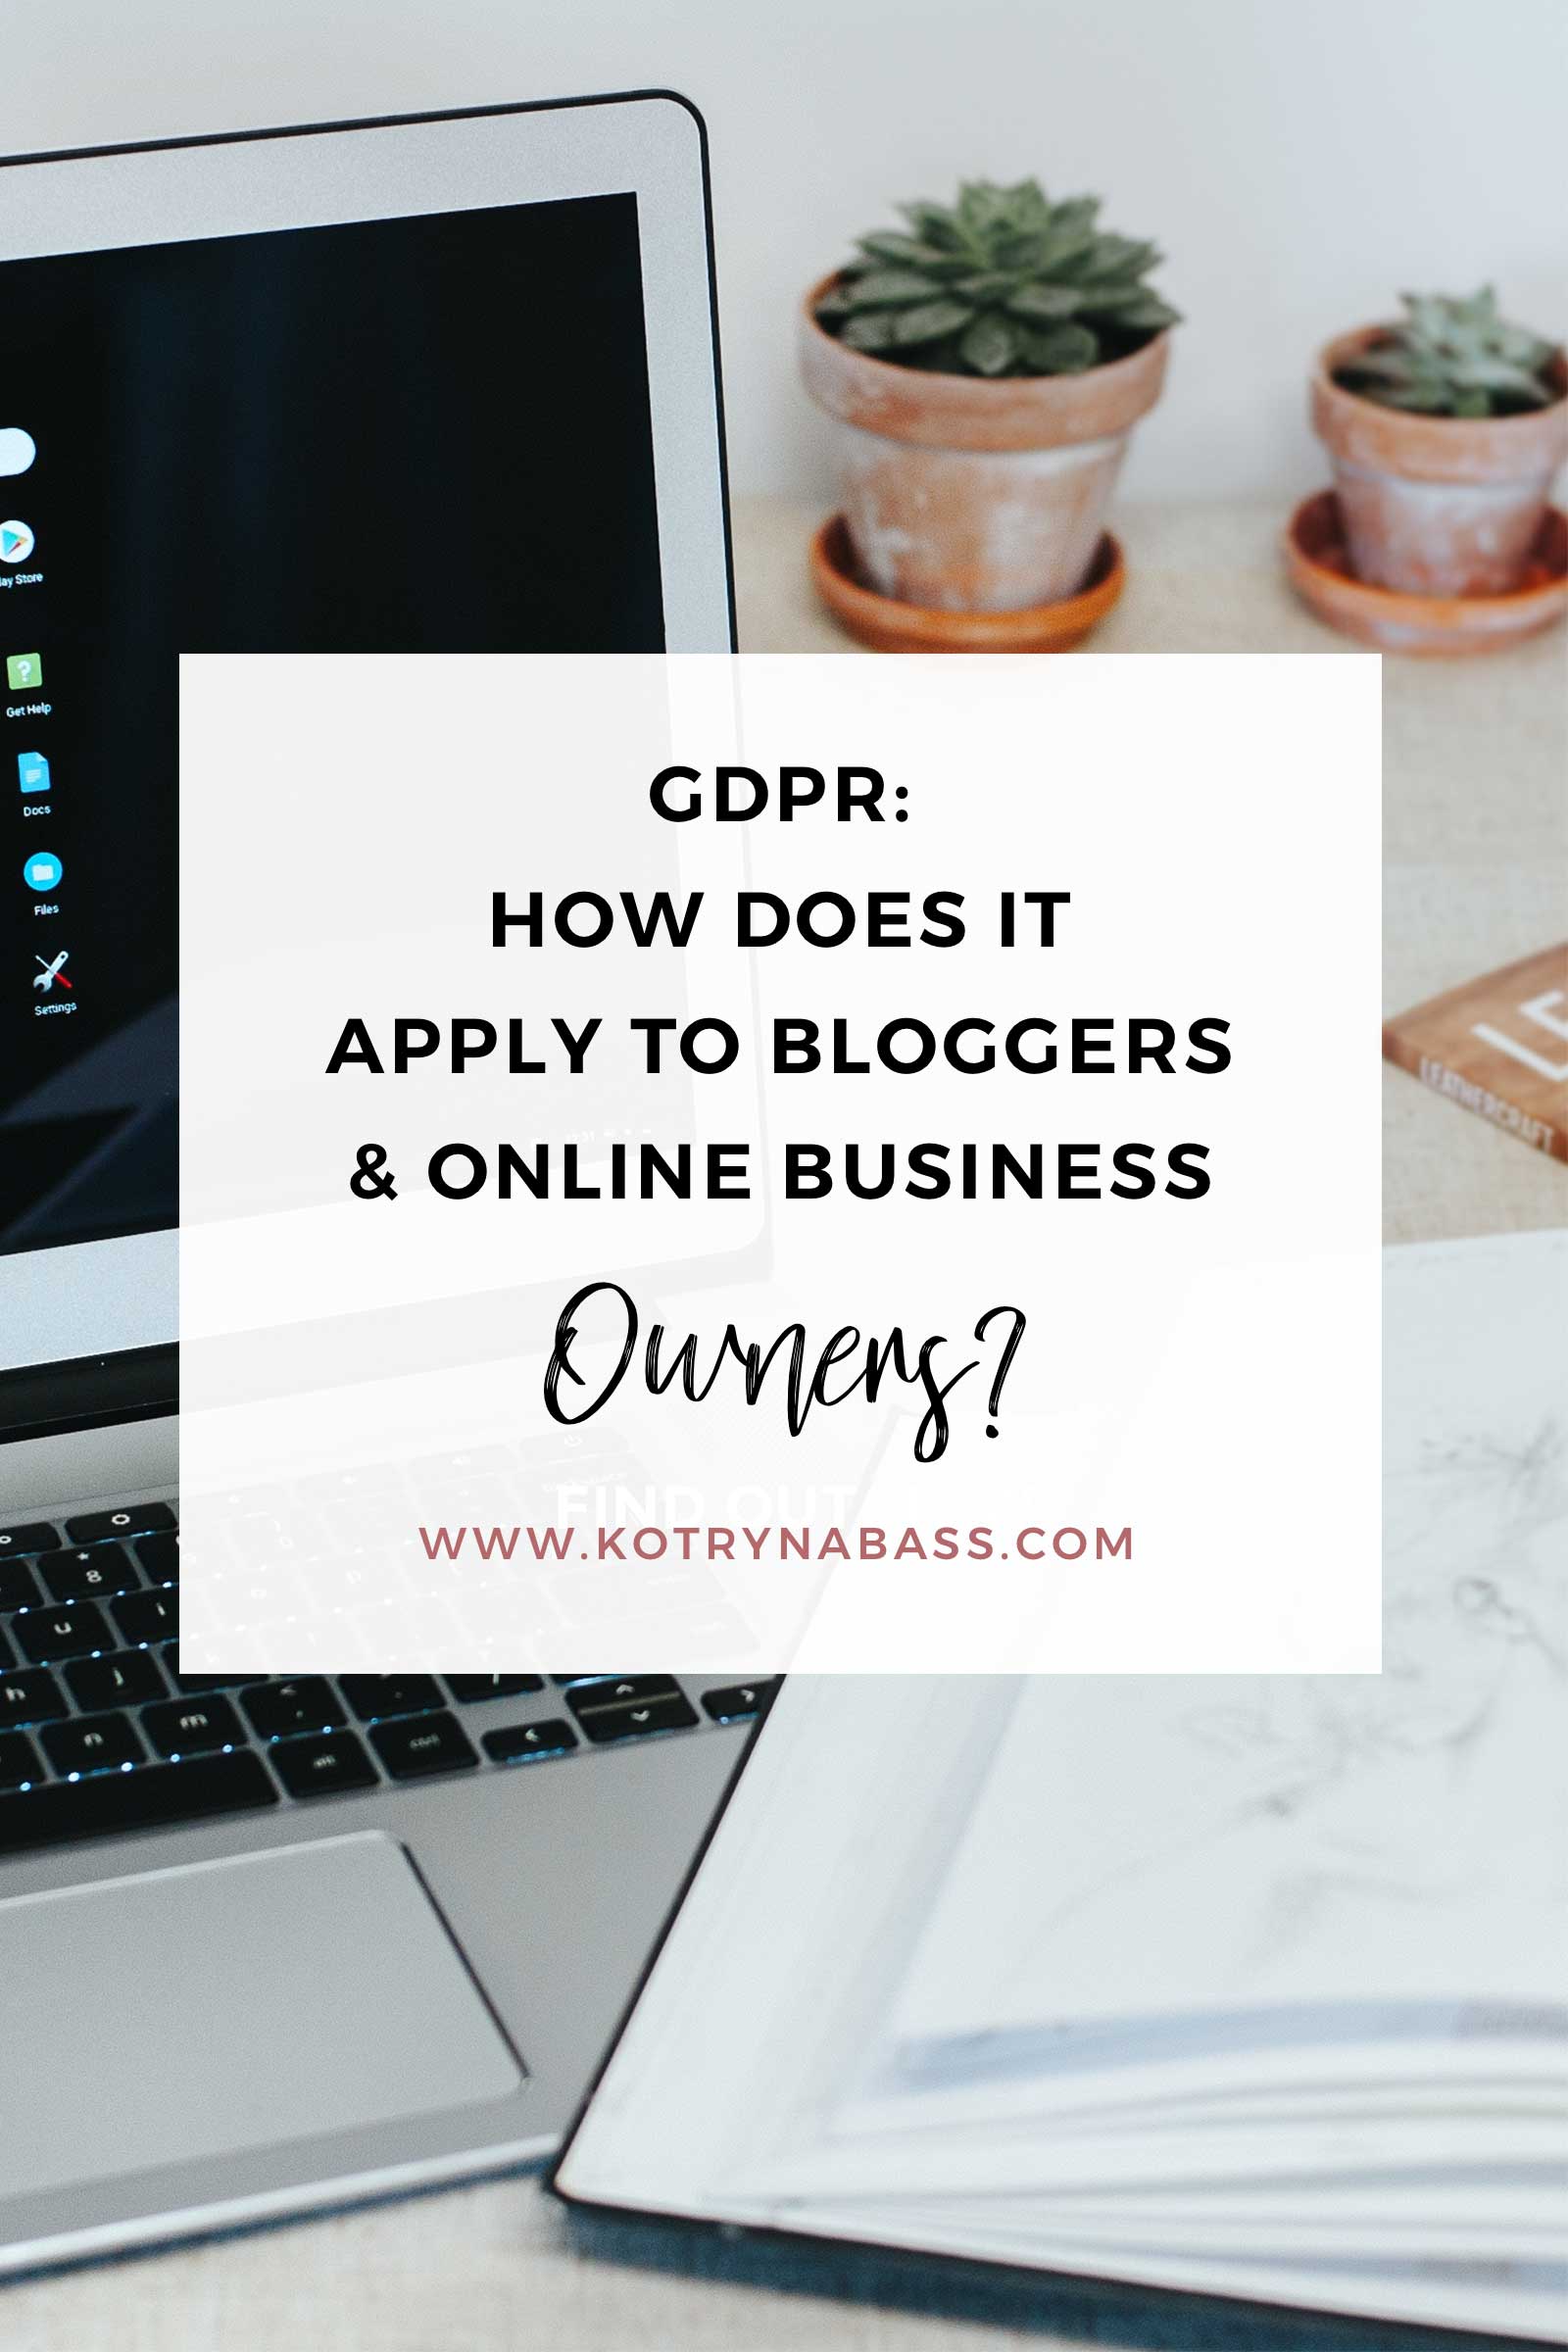 The GDPR is due to come into force on 25 May. Any business found not sticking to the rules could be charged fines of up to €20 million or 4% of the company's global annual turnover, though the toughest fines will be reserved for the worst data breaches or data abuse. If you're currently running a blog or an online business- keep on reading.